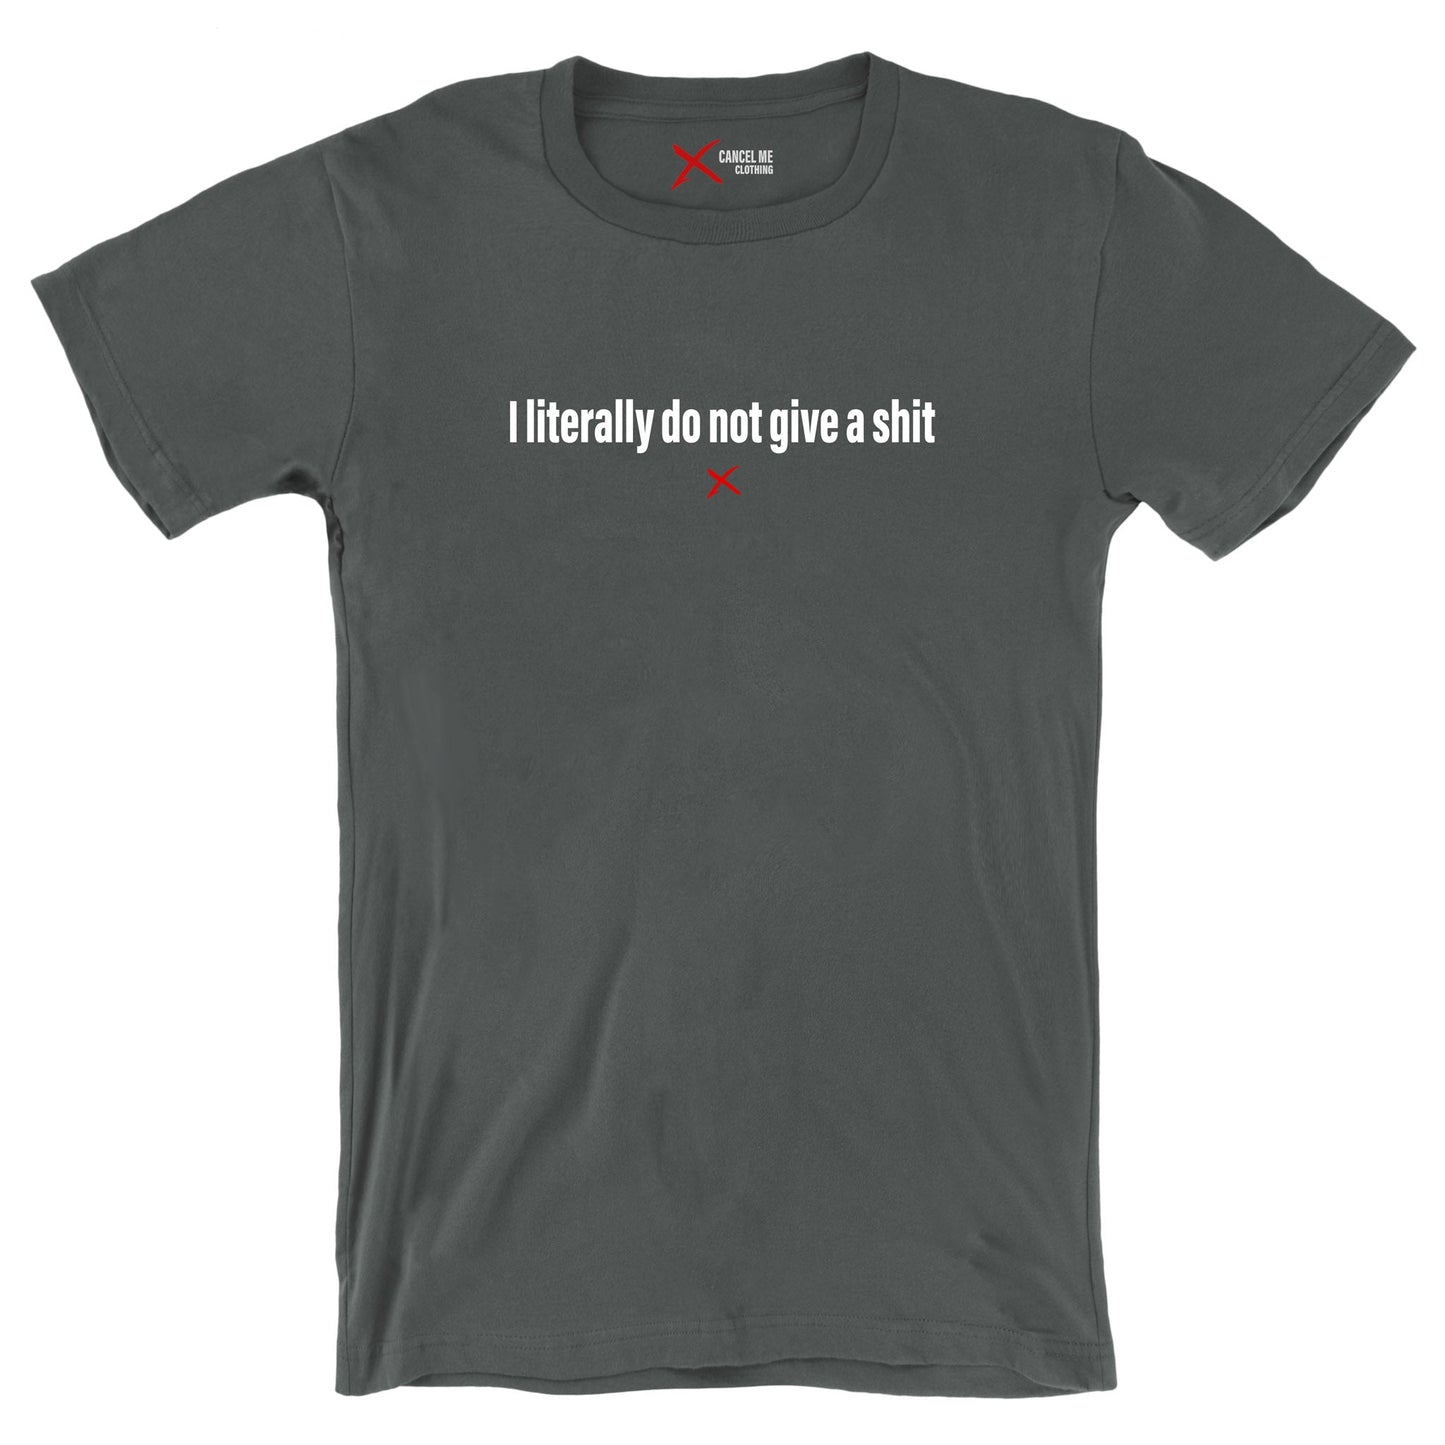 I literally do not give a shit - Shirt